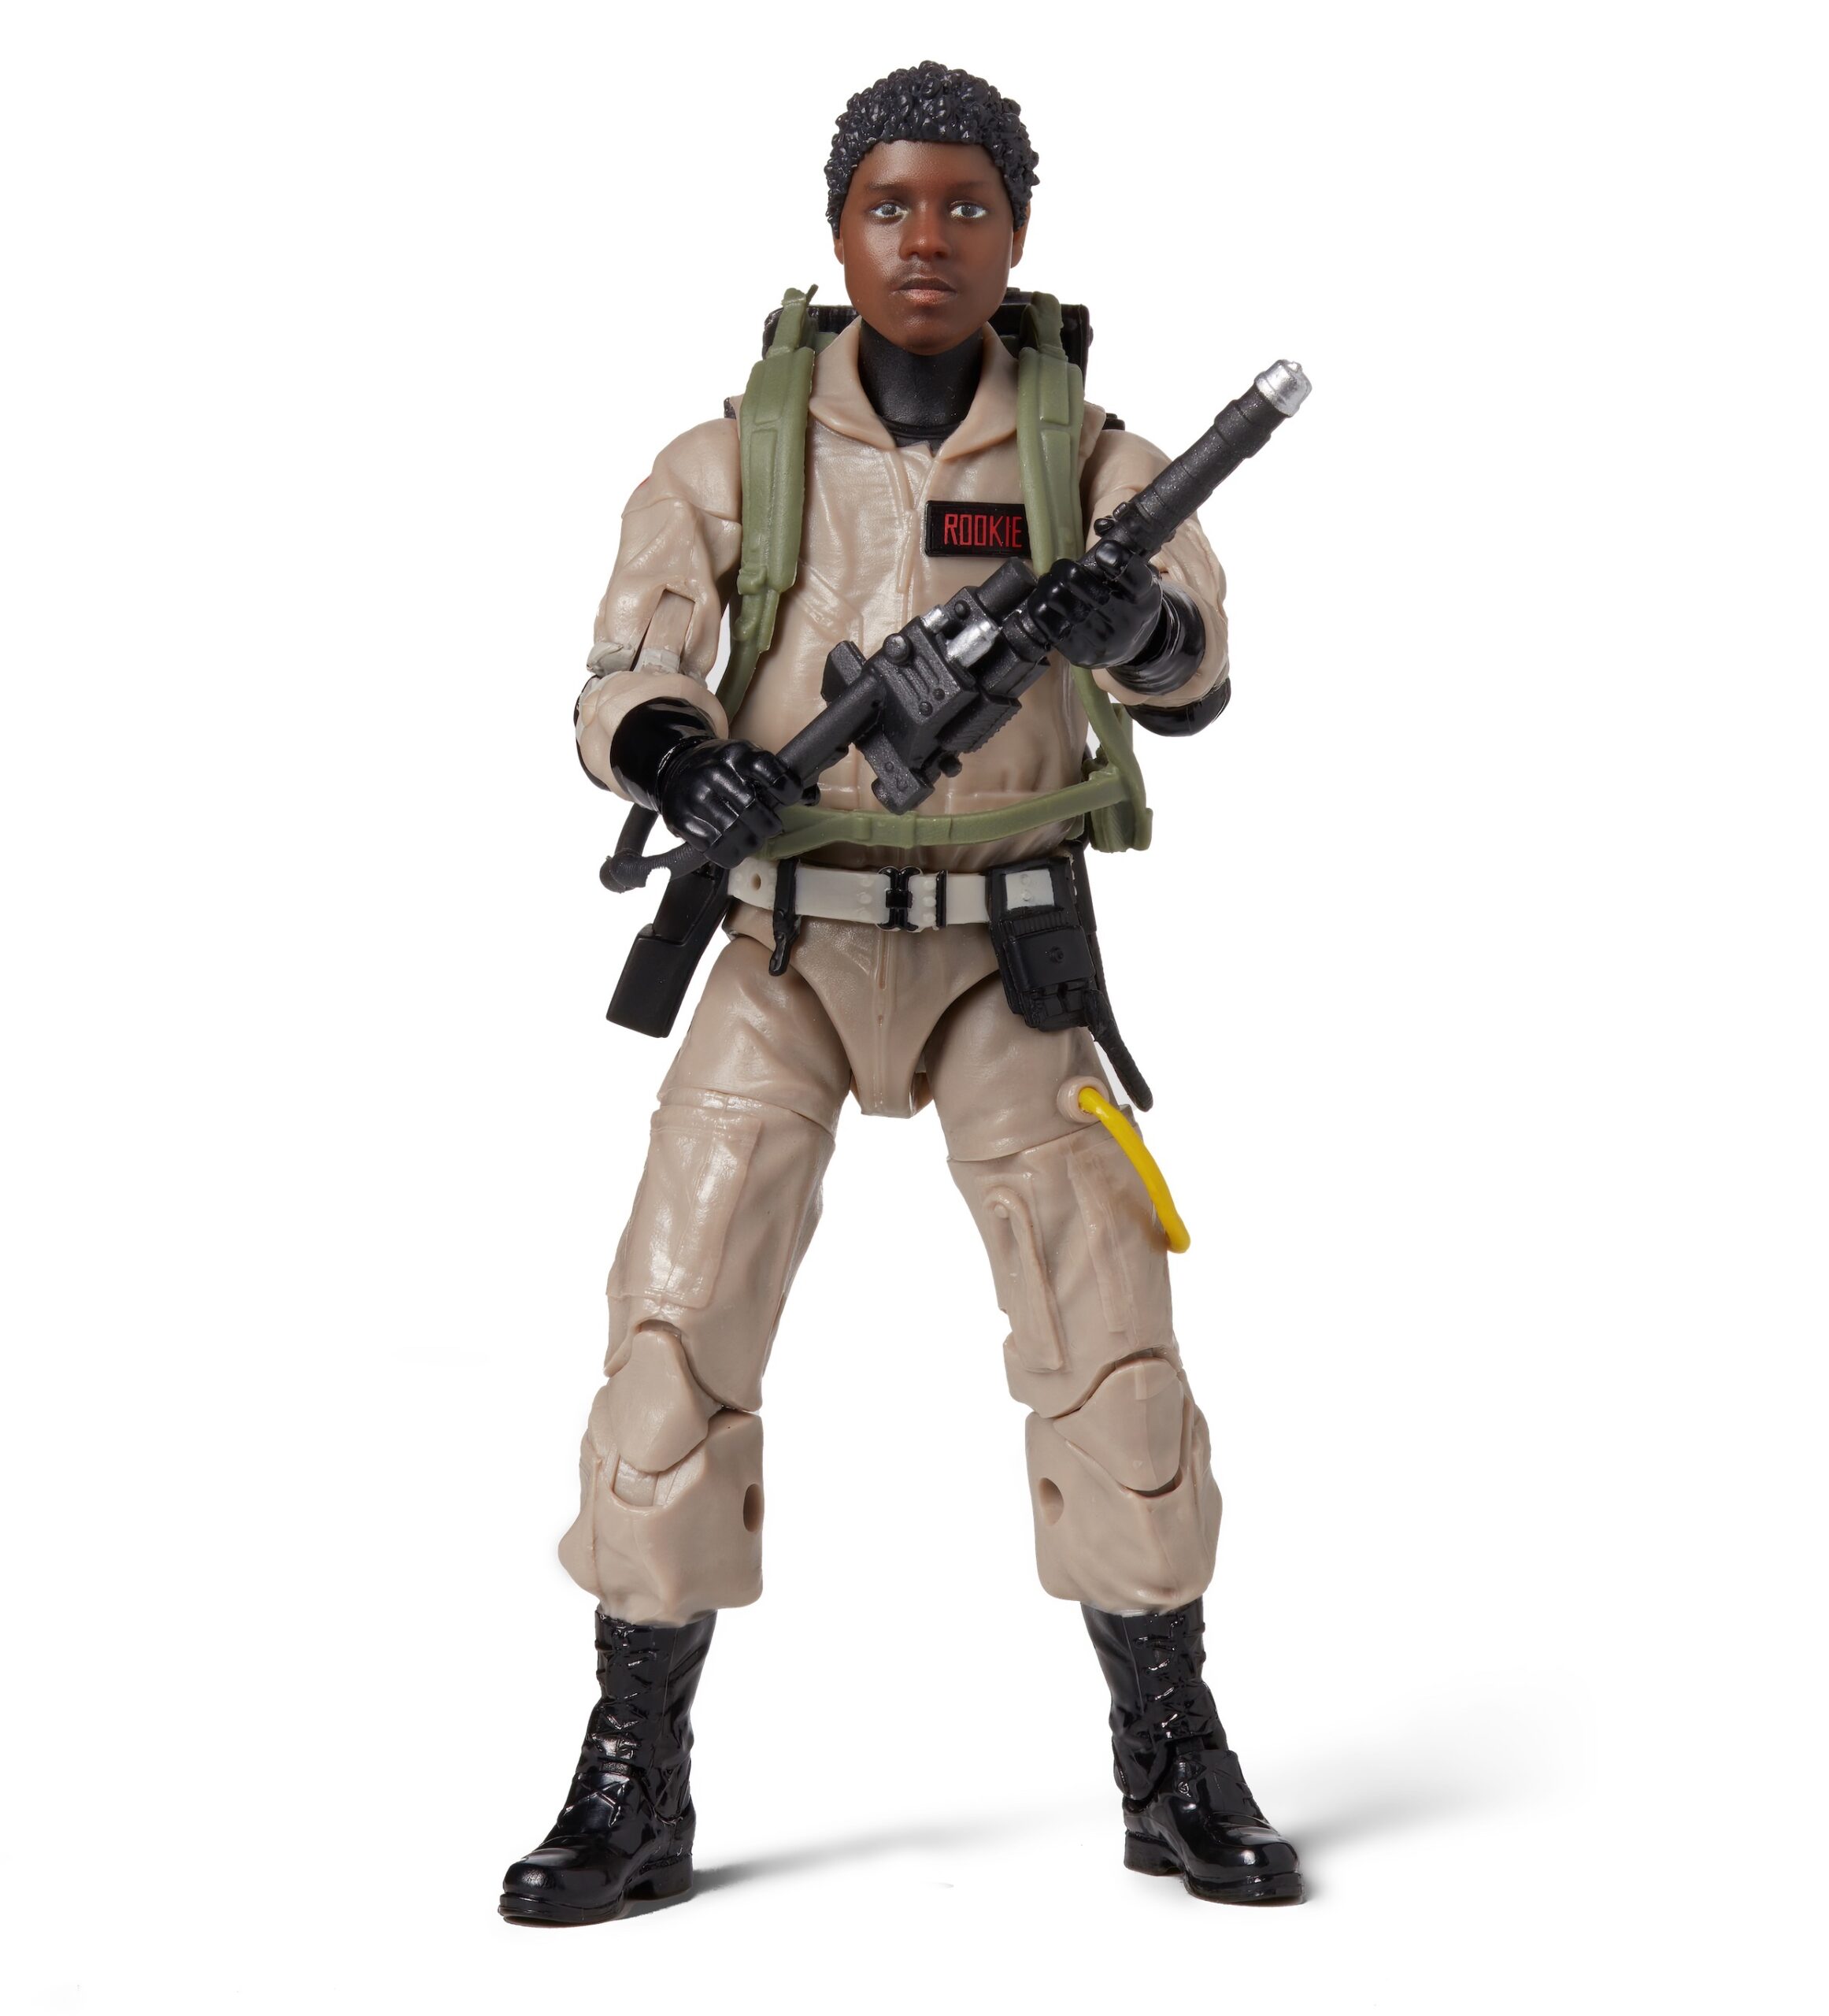 Personalized Action Figures